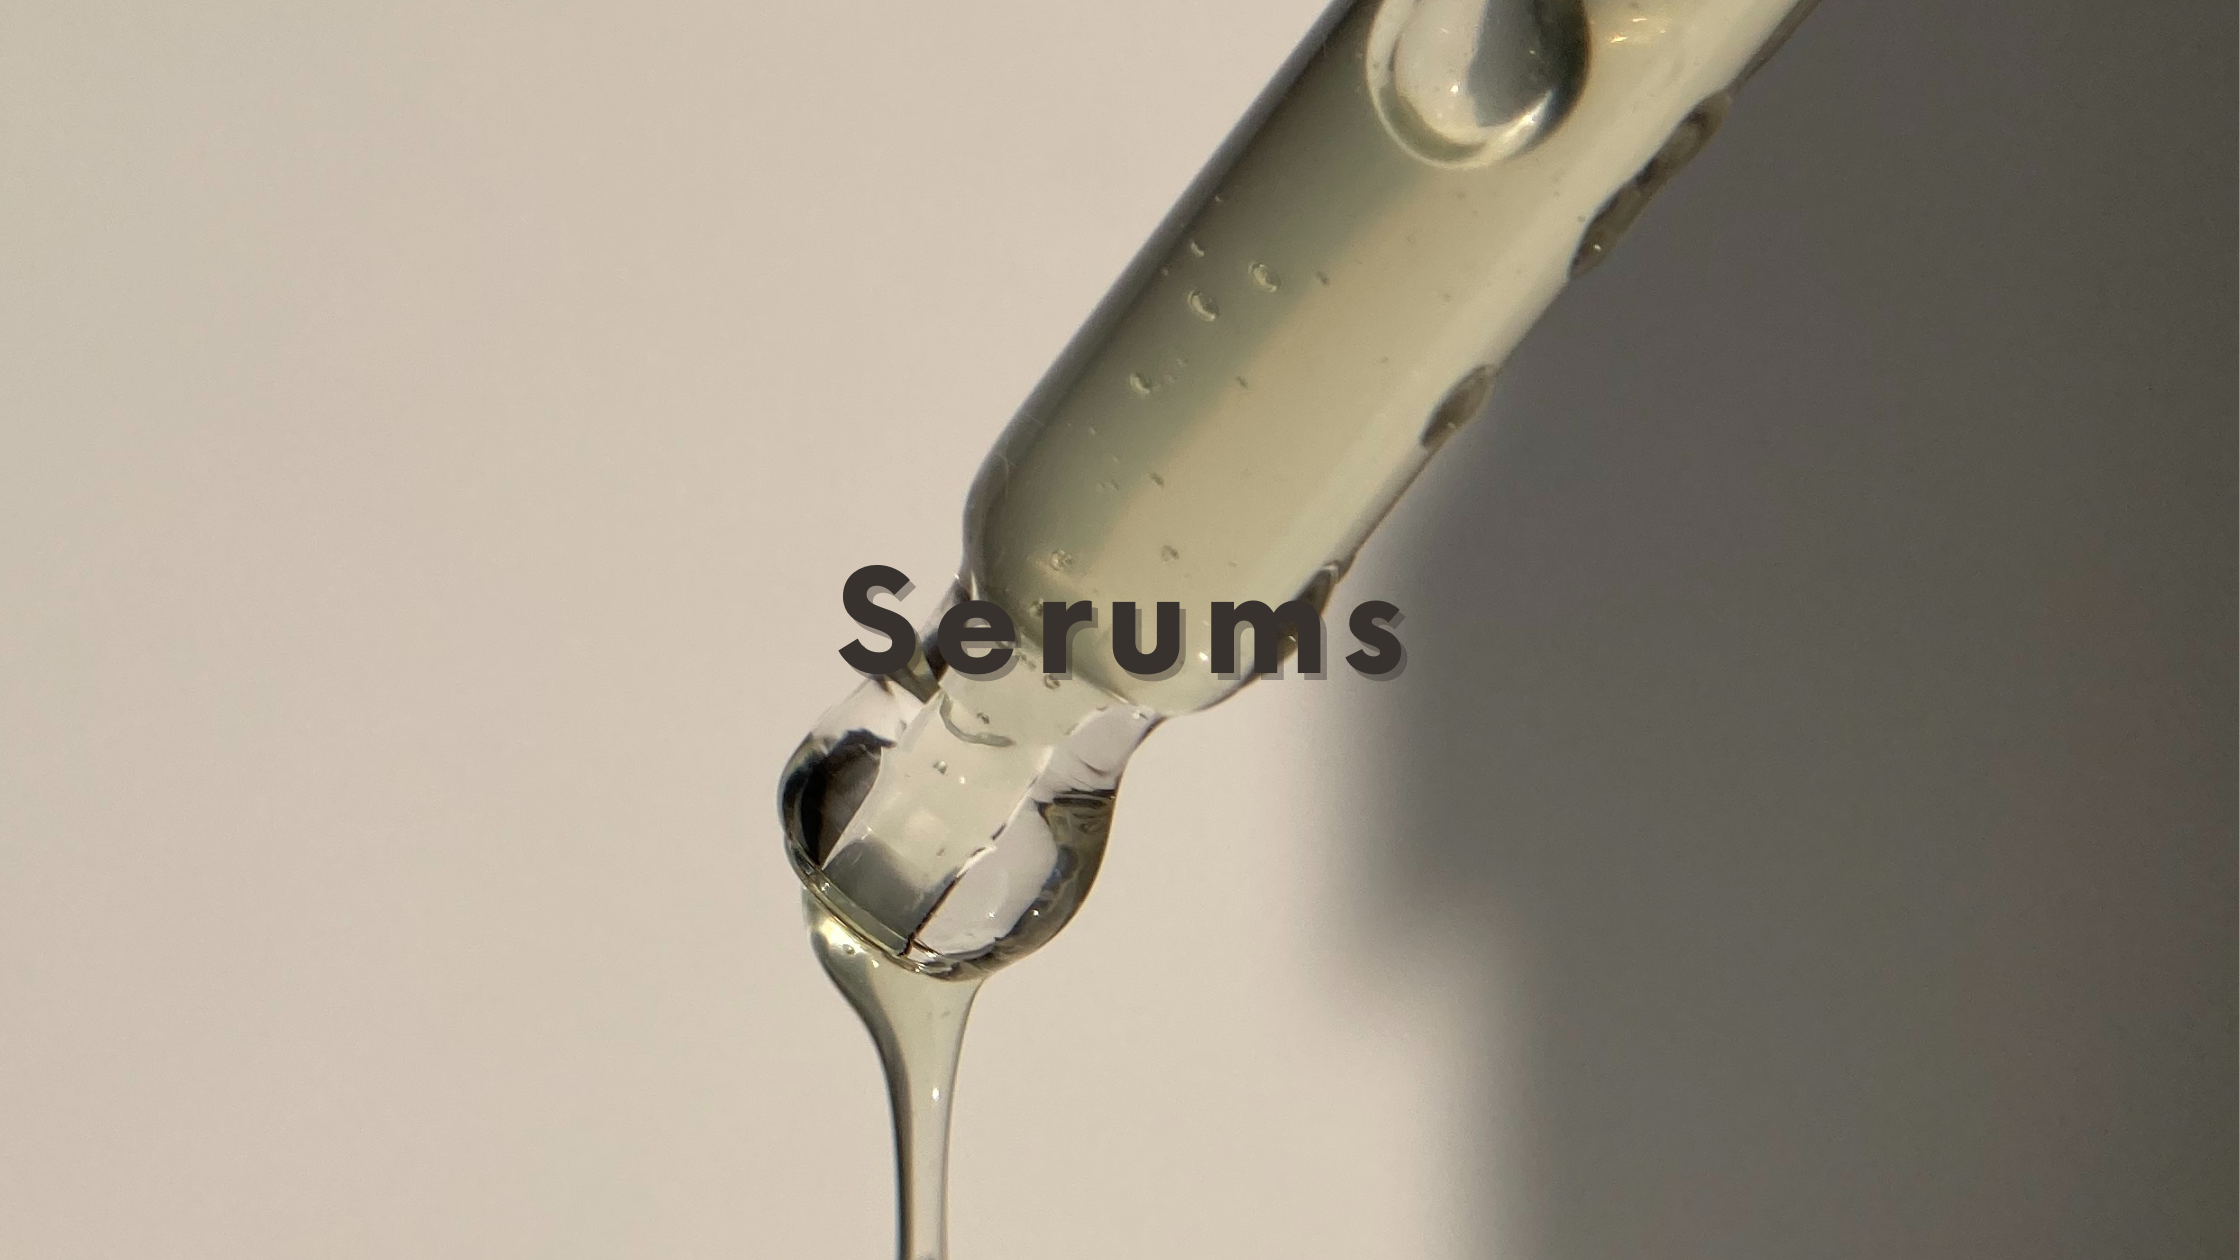 DSC Serums Blog Graphic with text Serums in black centered over image of serum dropper with serum dripping out